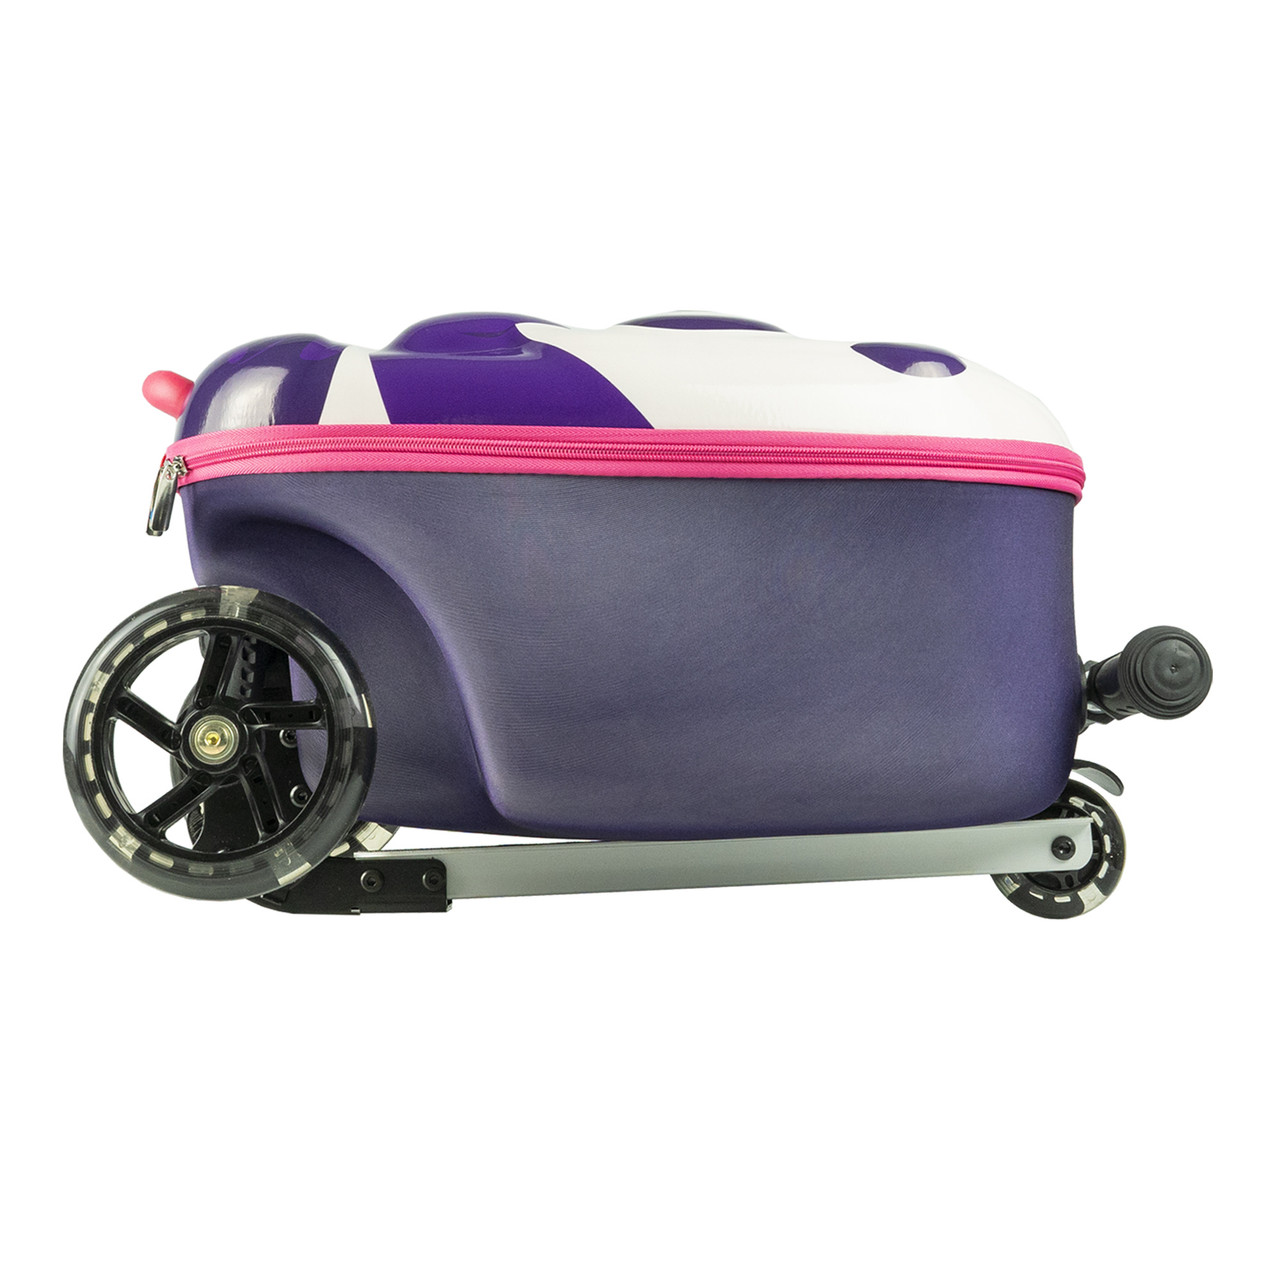 Kiddietotes Space Boy 3D Hard Shell Scooter Ride-On Suitcase for